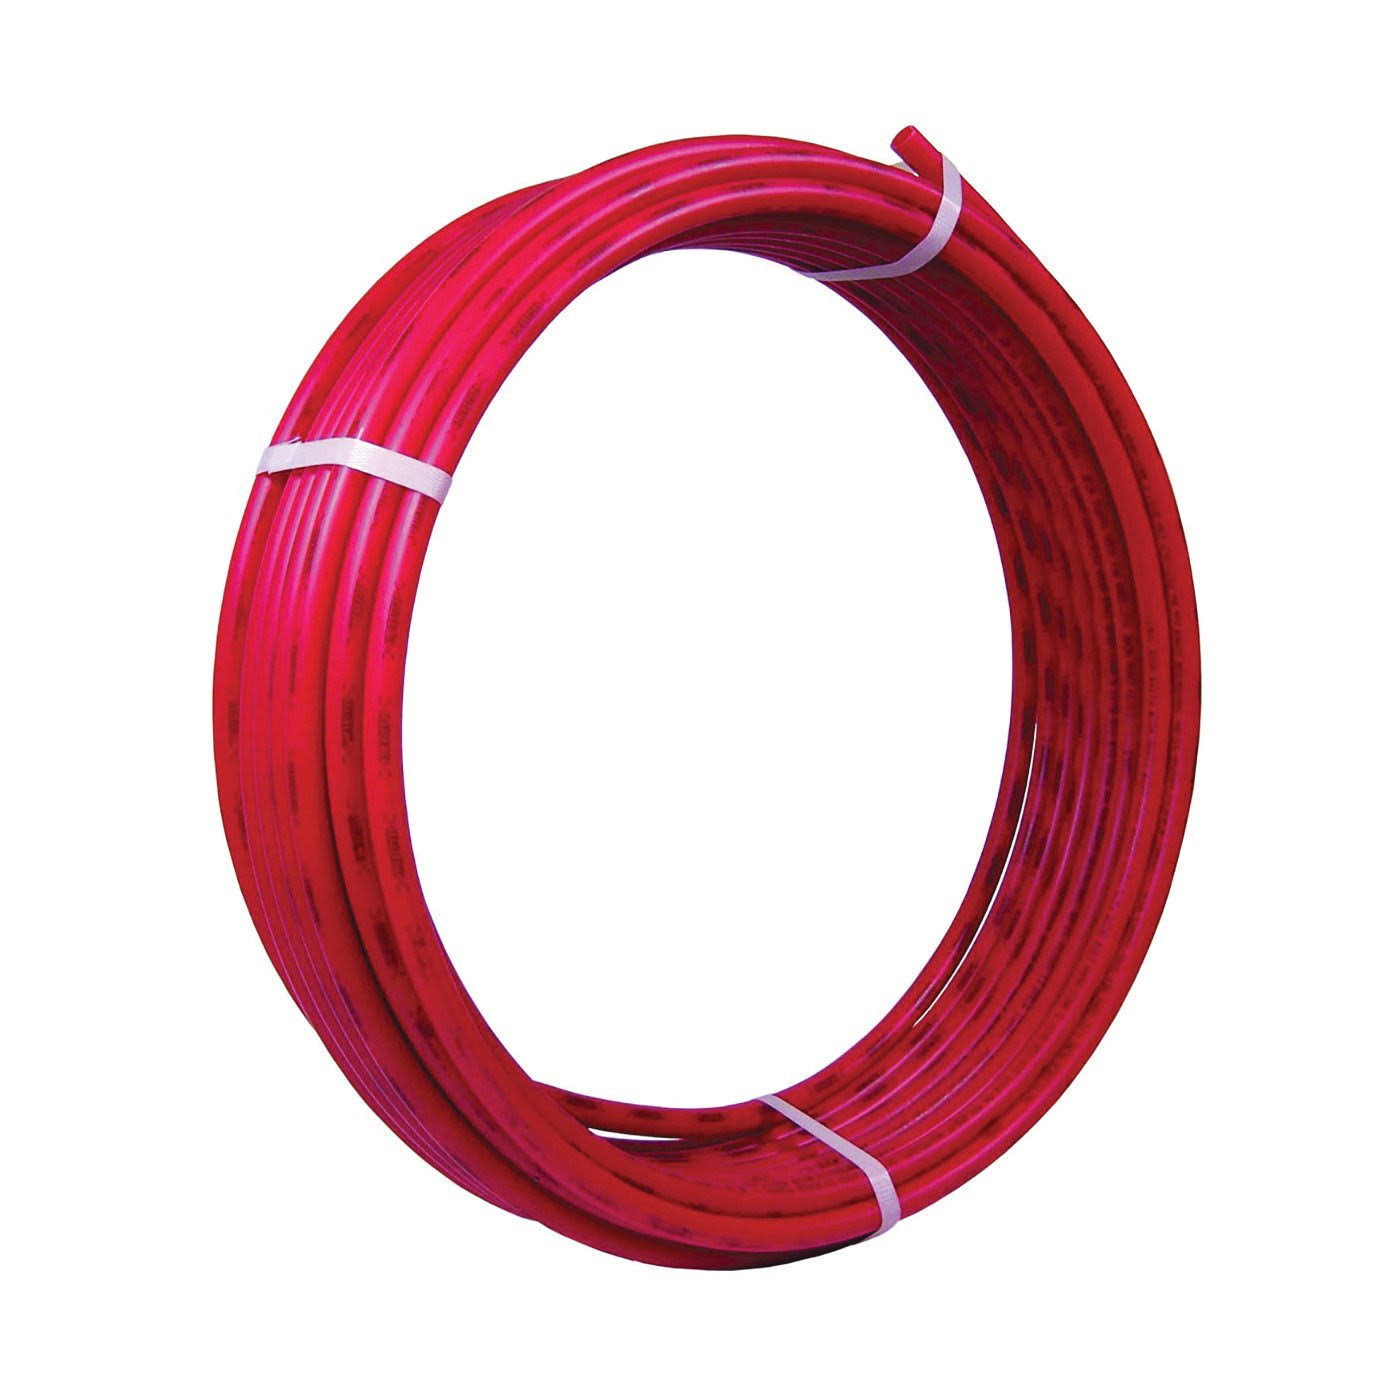 Apollo APPR30012 Cross-linked Pex-B Pipe, 1/2 in, 300 ft L, Red